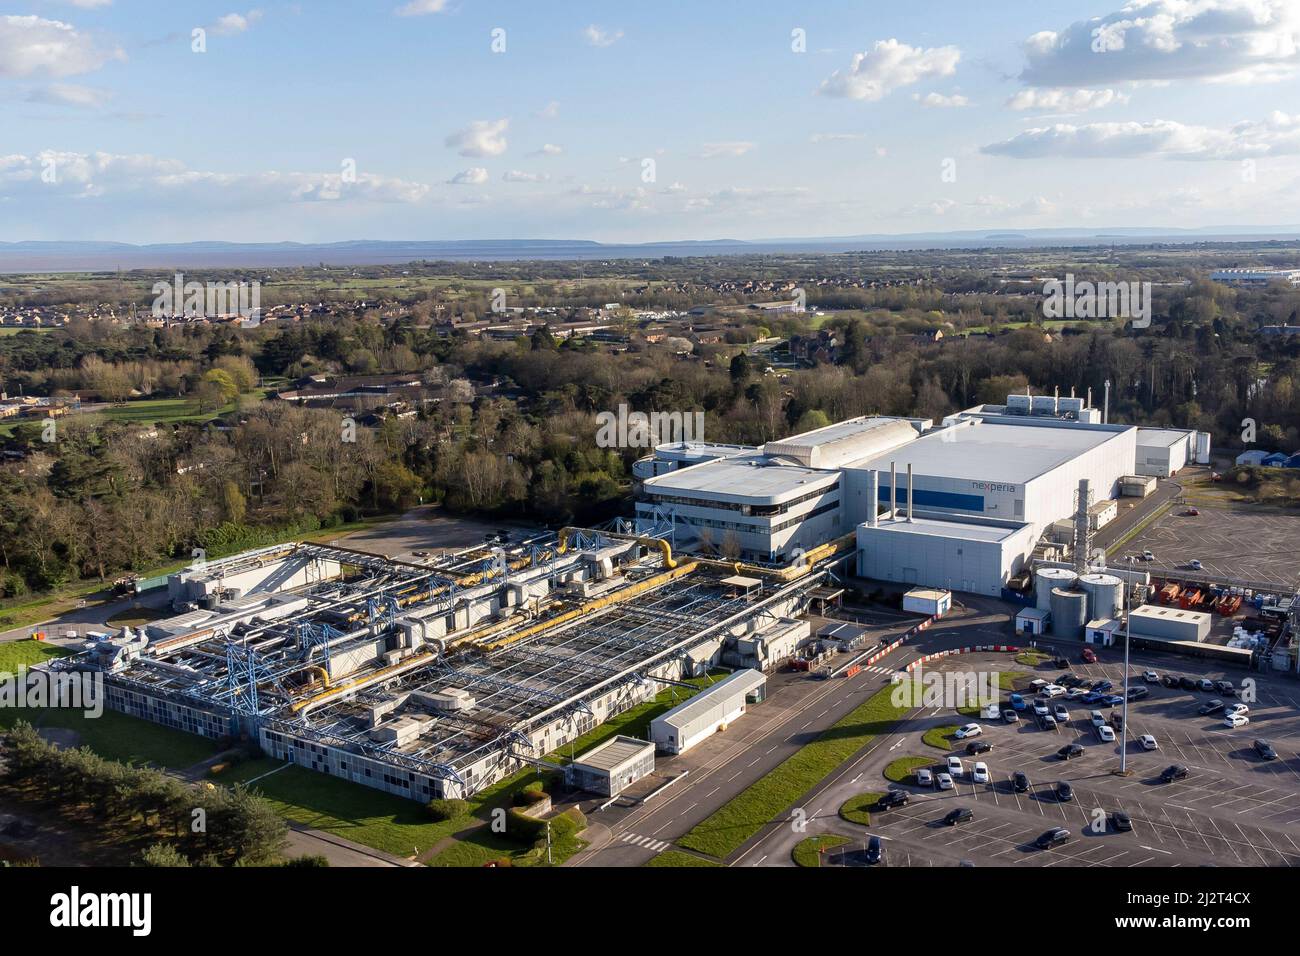 The Nexperia plant in Newport, Wales. Nexperia, a Dutch subsidiary of the Chinese technology company Wingtech, acquired the Newport Wafer Fab in July 2021 for £63m however the UK Government may still decide to intervene under the National Security and Investment Act. The plant, which makes semiconductors, employs 450 people. Stock Photo